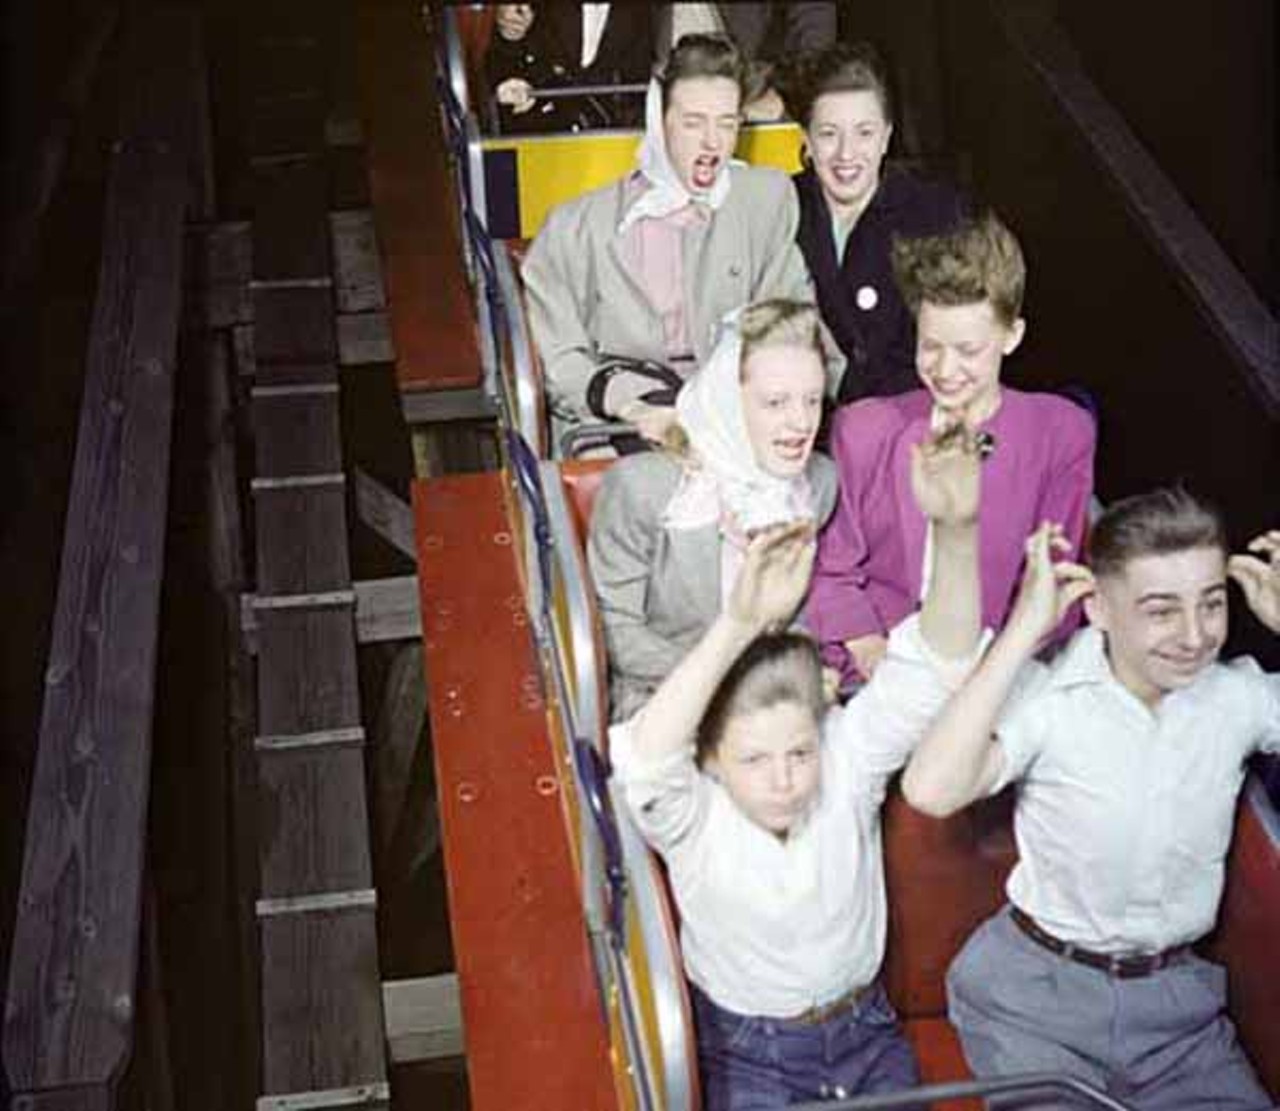 Get scared silly on the Comet at the Forest Park Highlands (circa 1947).